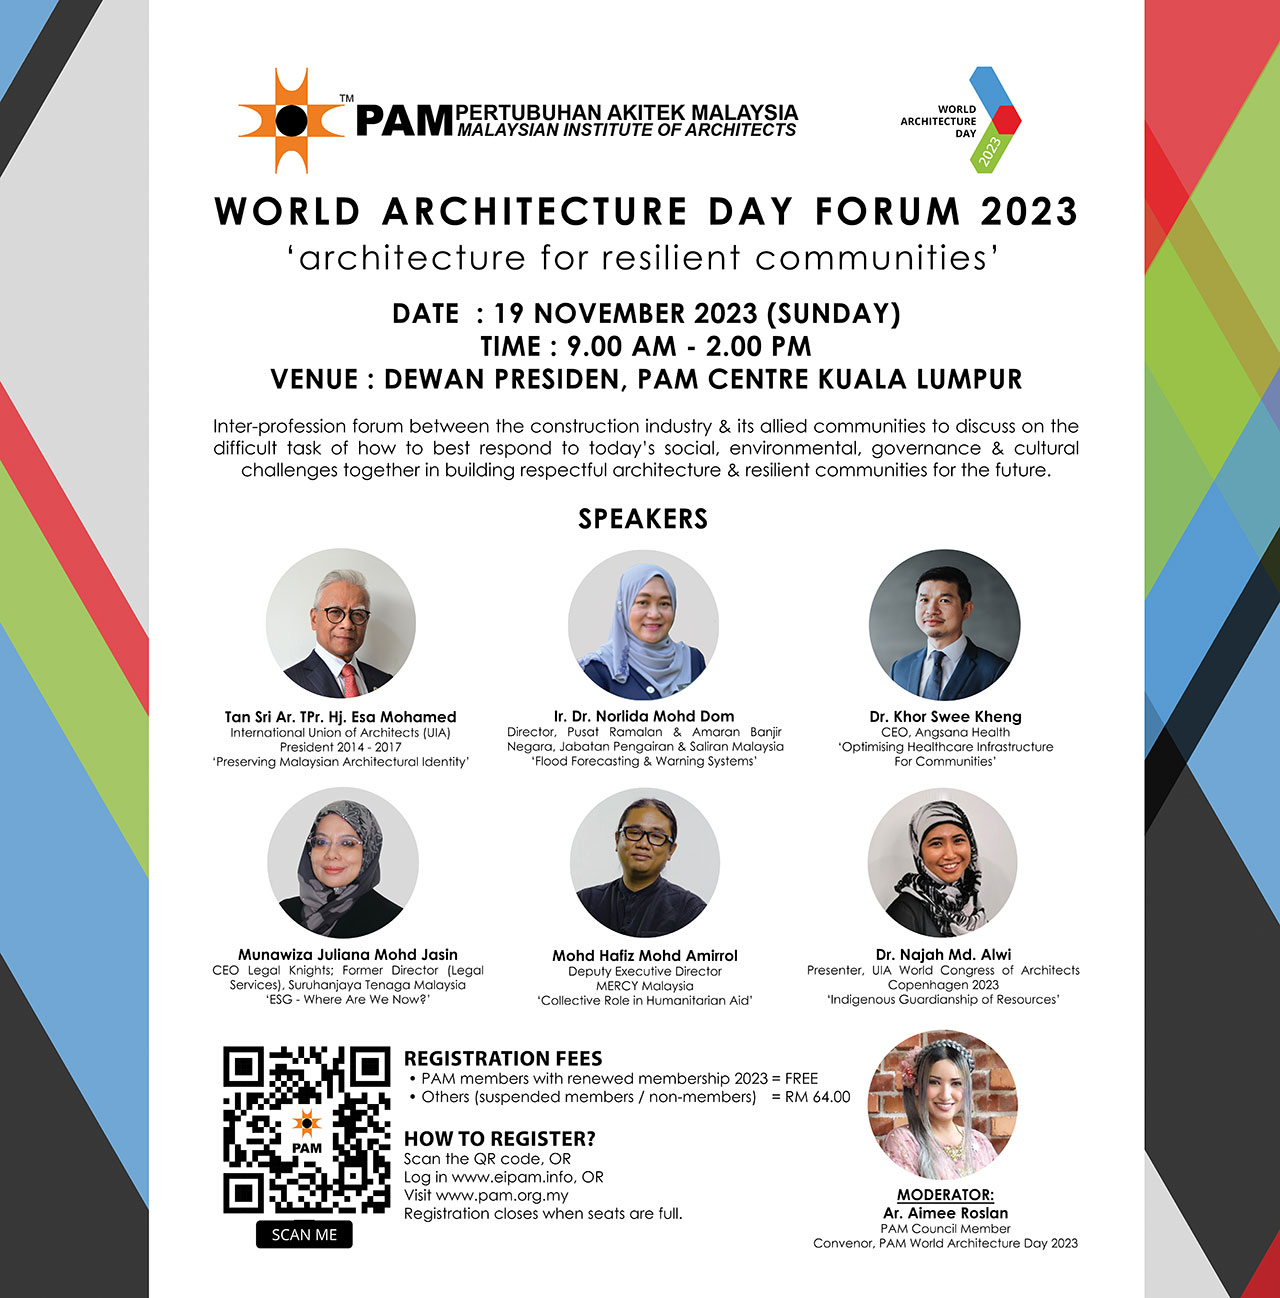 World Architecture Day Forum 2023 - Architecture for Resilient Communities